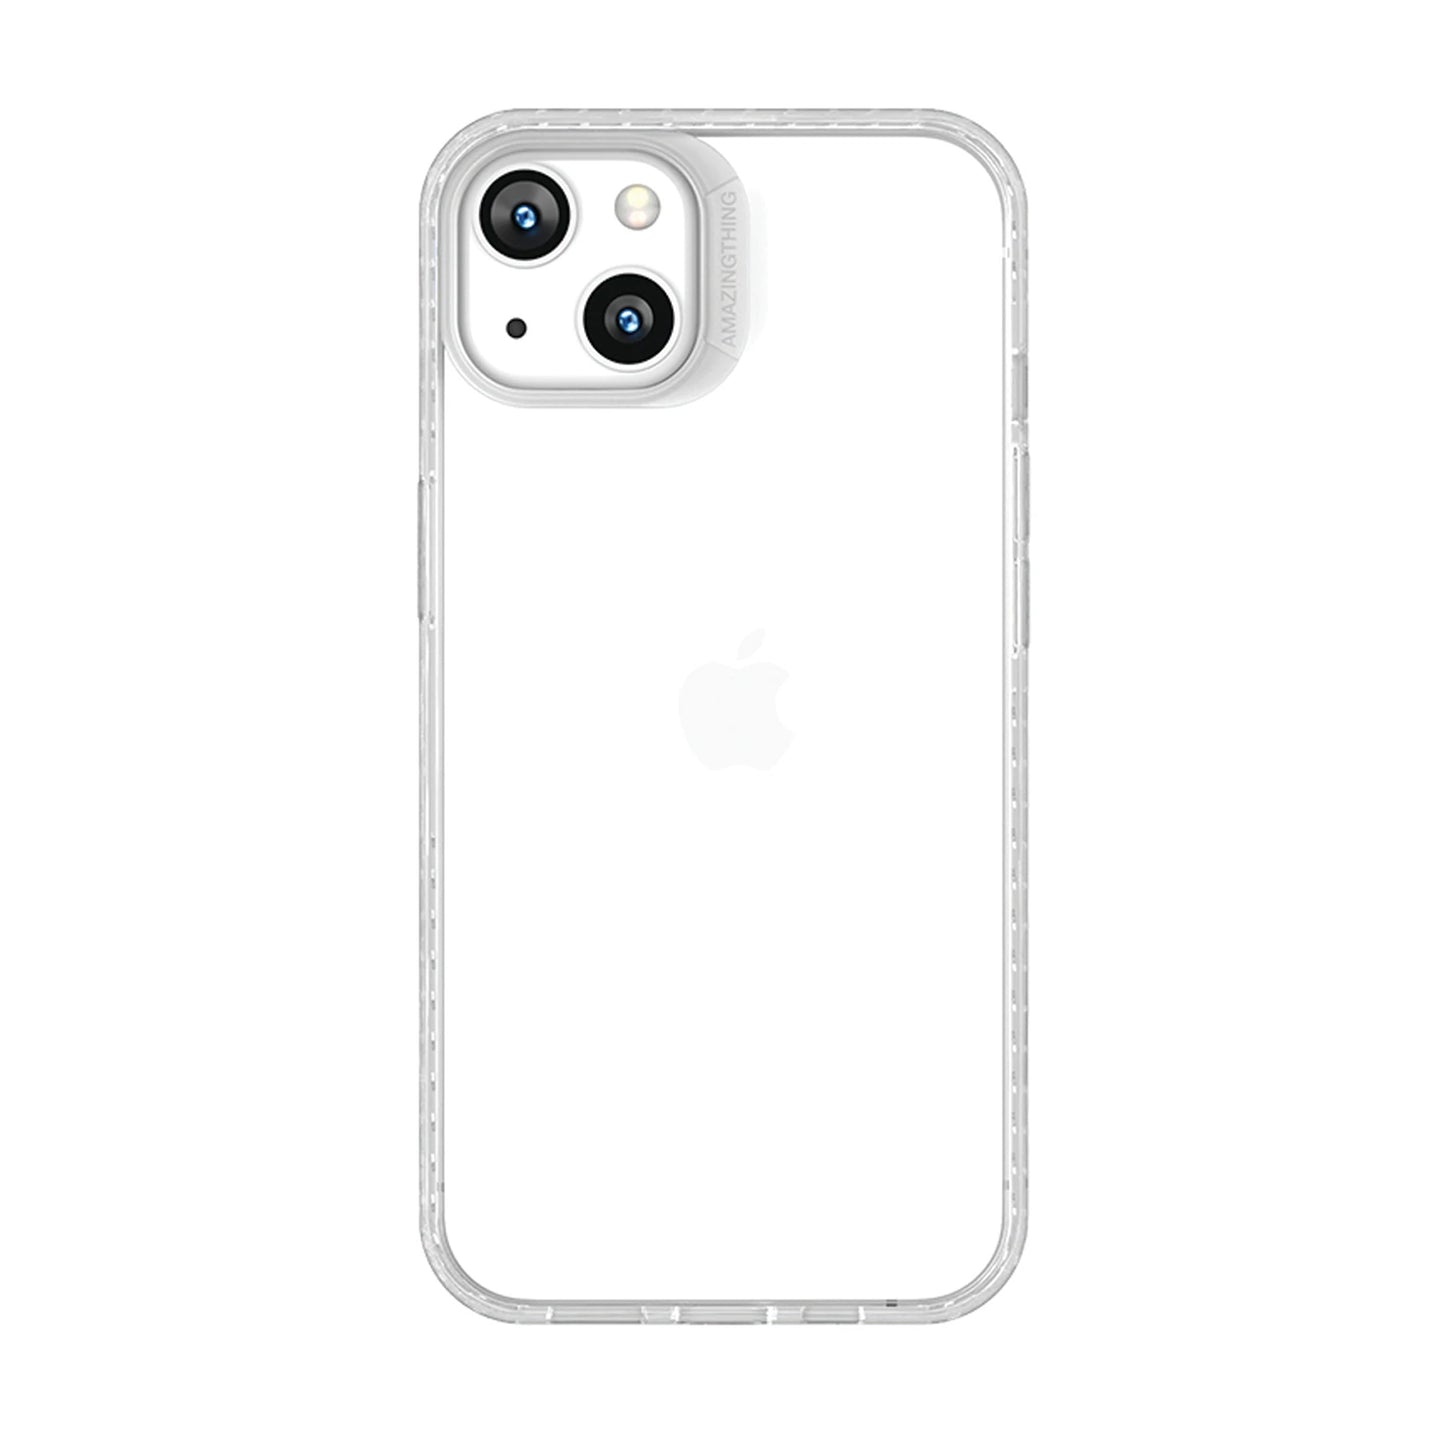 AMAZINGthing Titan Pro Drop Proof Case for iPhone 13 6.1" 5G ( 2021 ) - Anti-microbial - Clear (Barcode: 4892878068550 )